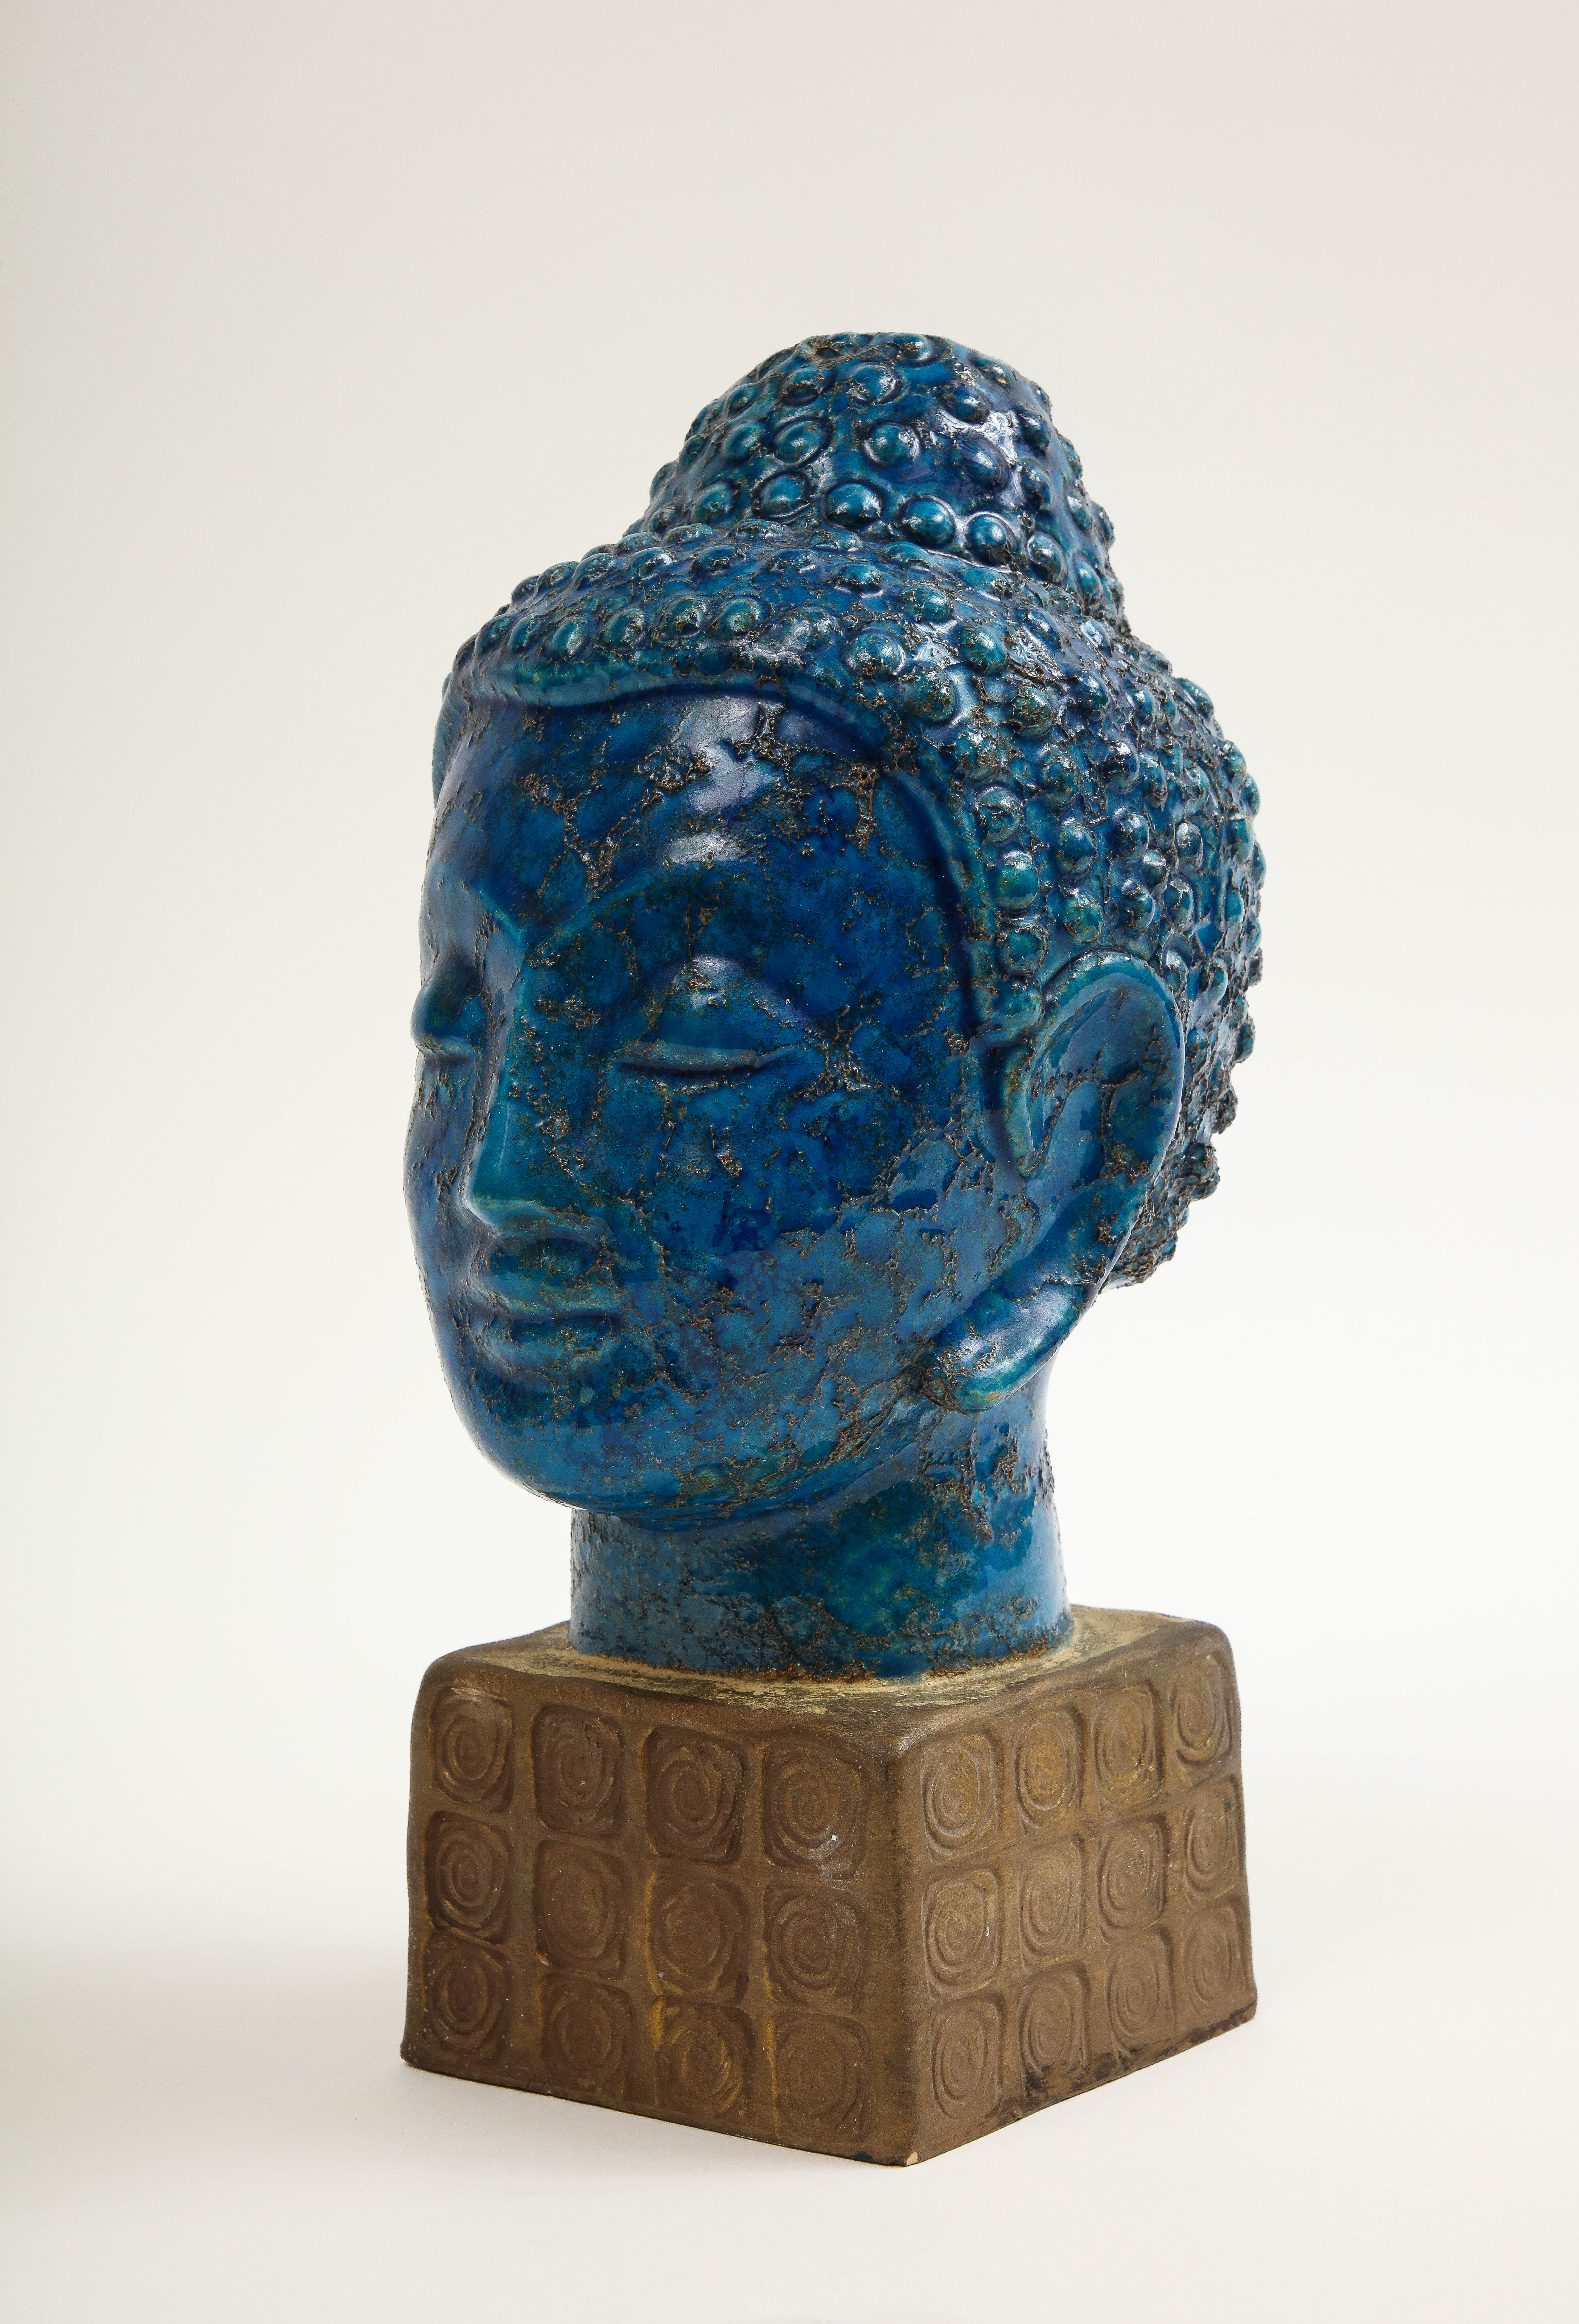 Aldo Londi Bitossi Buddha bust, ceramic, blue, gold, Rosenthal Netter, signed. Medium scale Buddha bust from Aldo Londi's Cinese series. The Buddha's face is glazed in a textured royal blue with its hair and ushnisha glazed in a slightly lighter